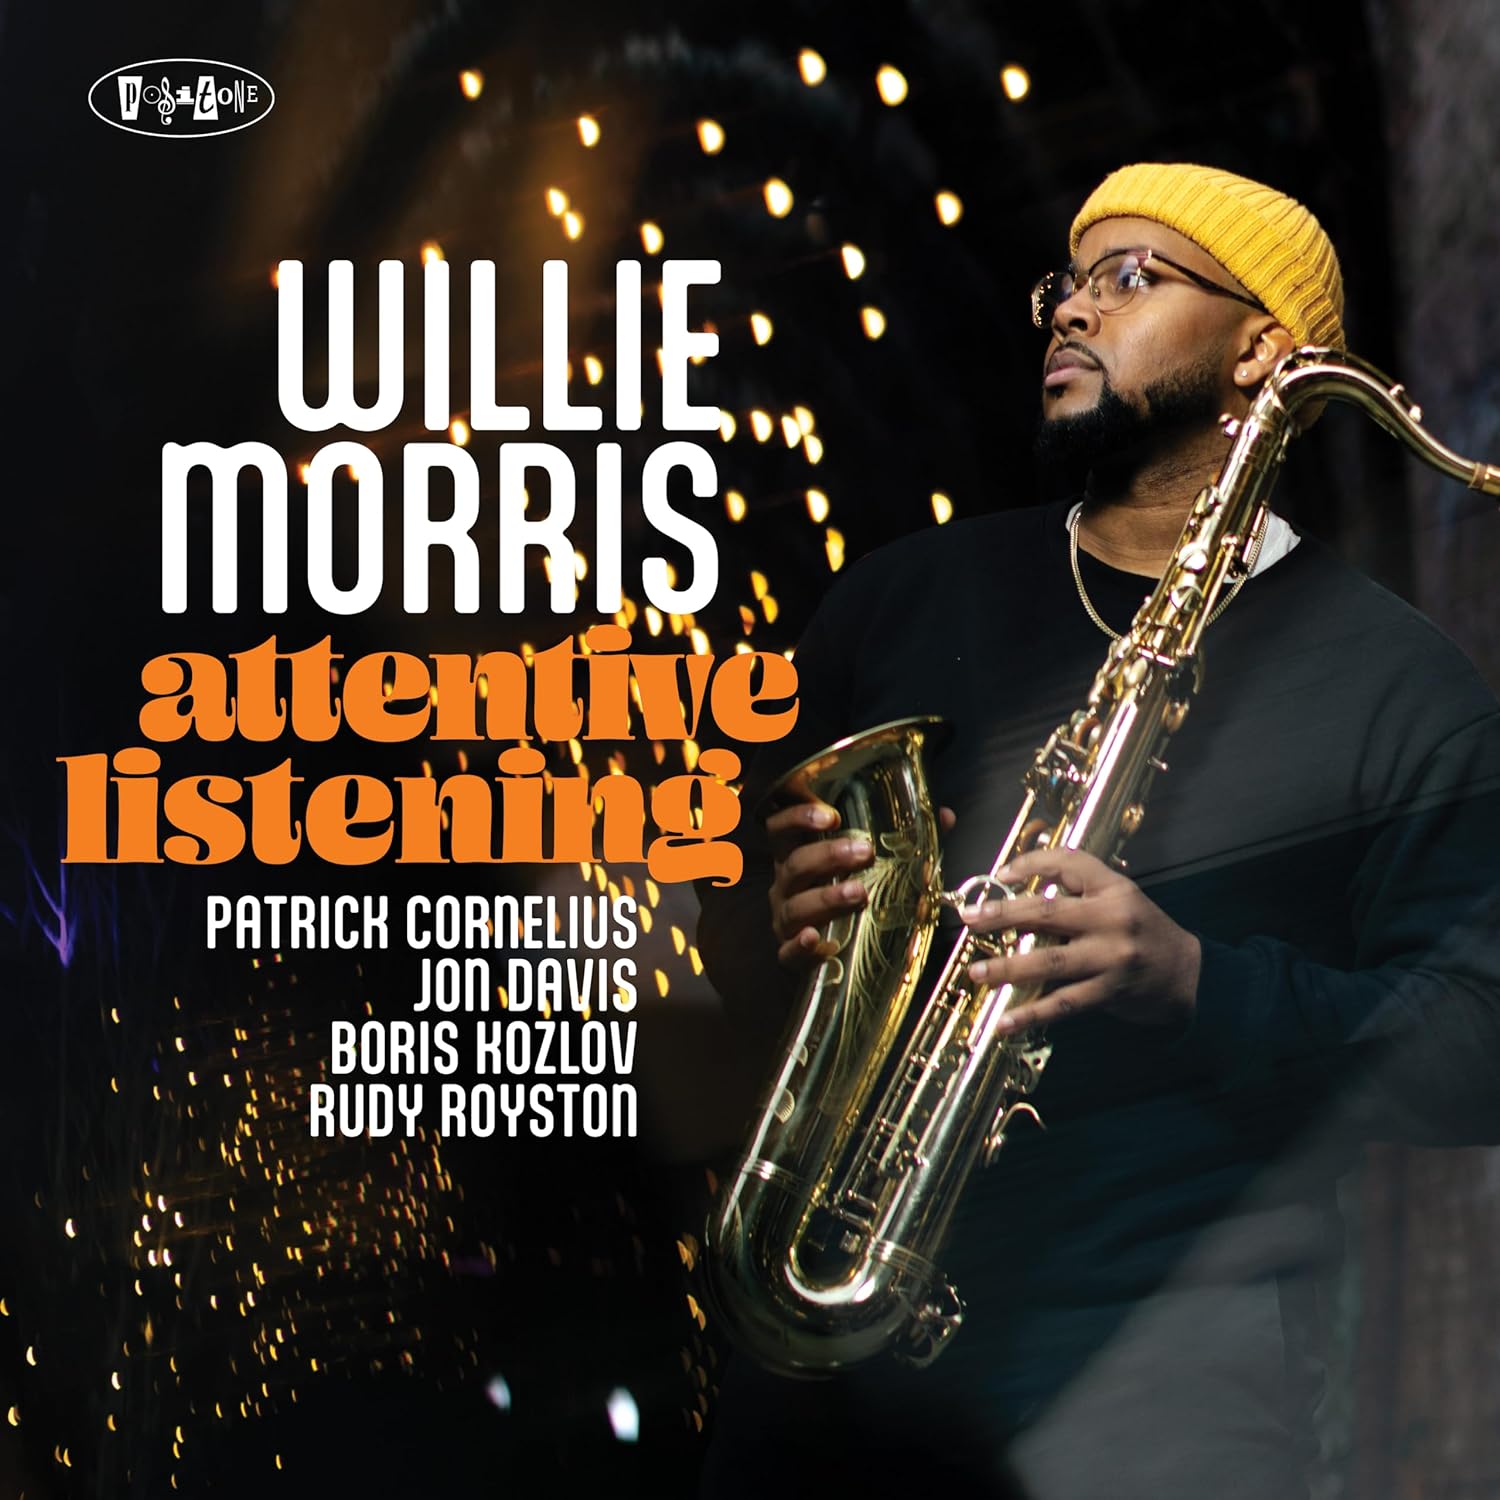 WILLIE MORRIS - Attentive Listening cover 